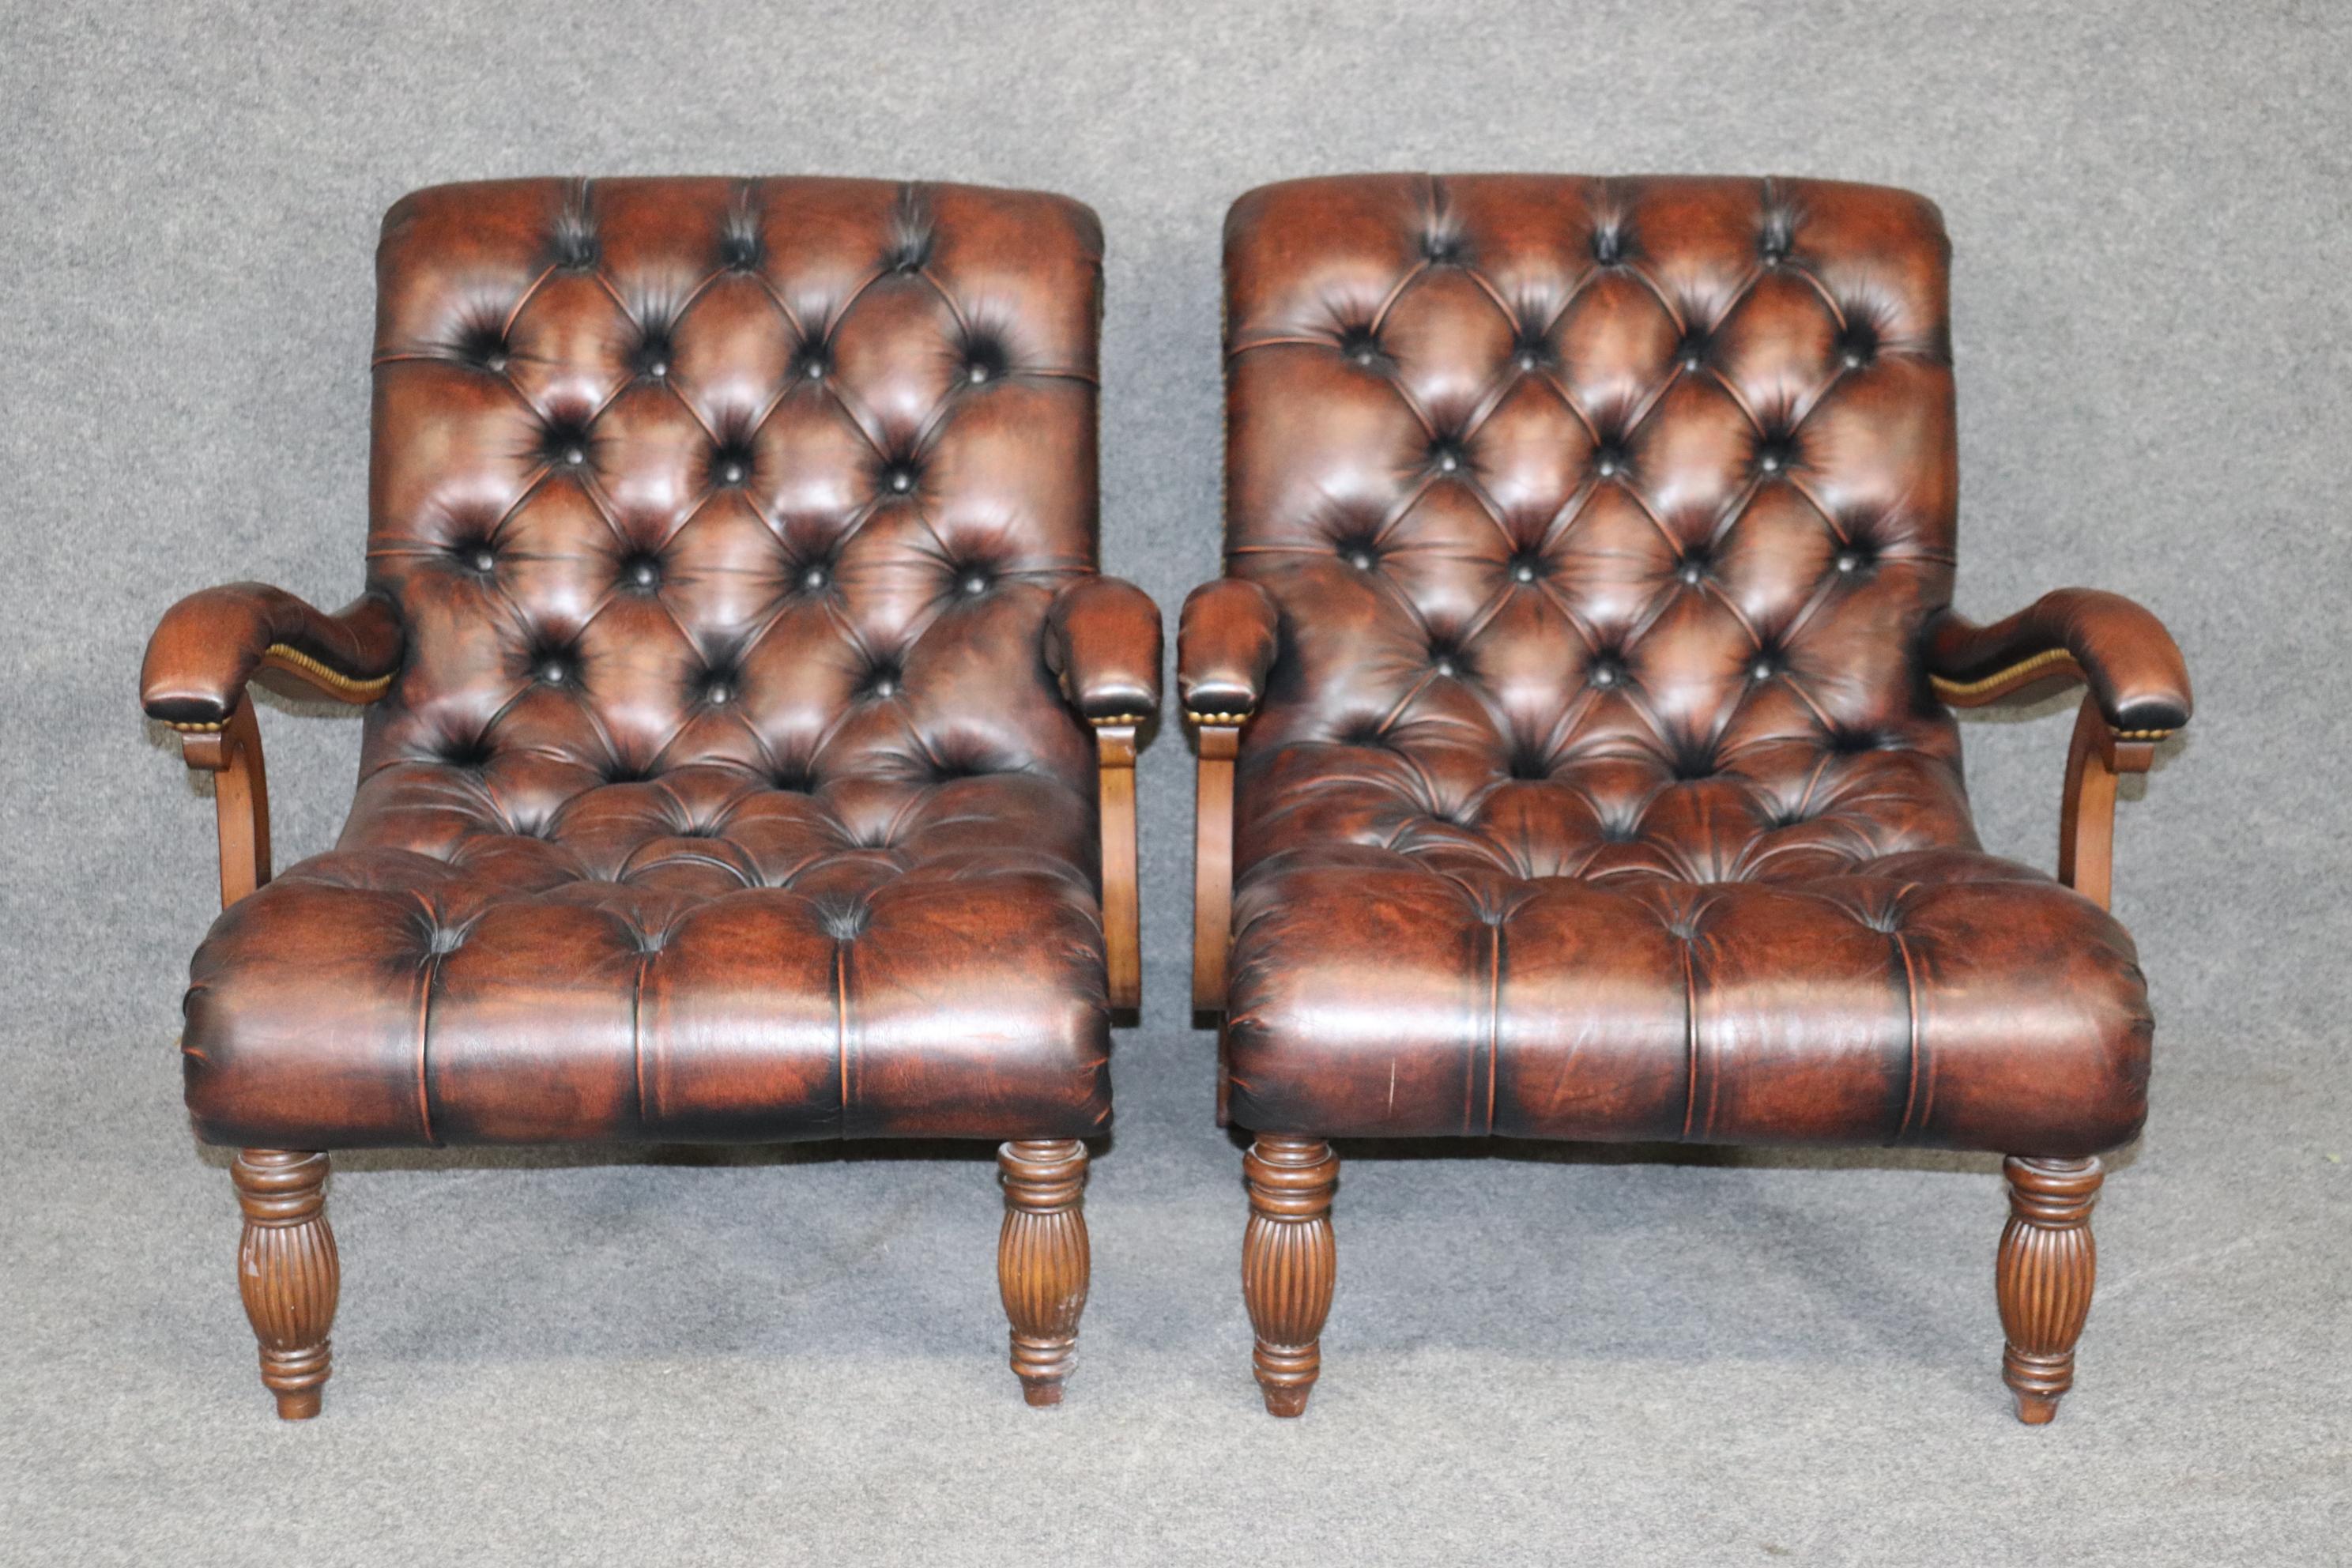 British Colonial Pair of Brown Antiqued Leather Plantation or Campeche Chairs with Ottoman 